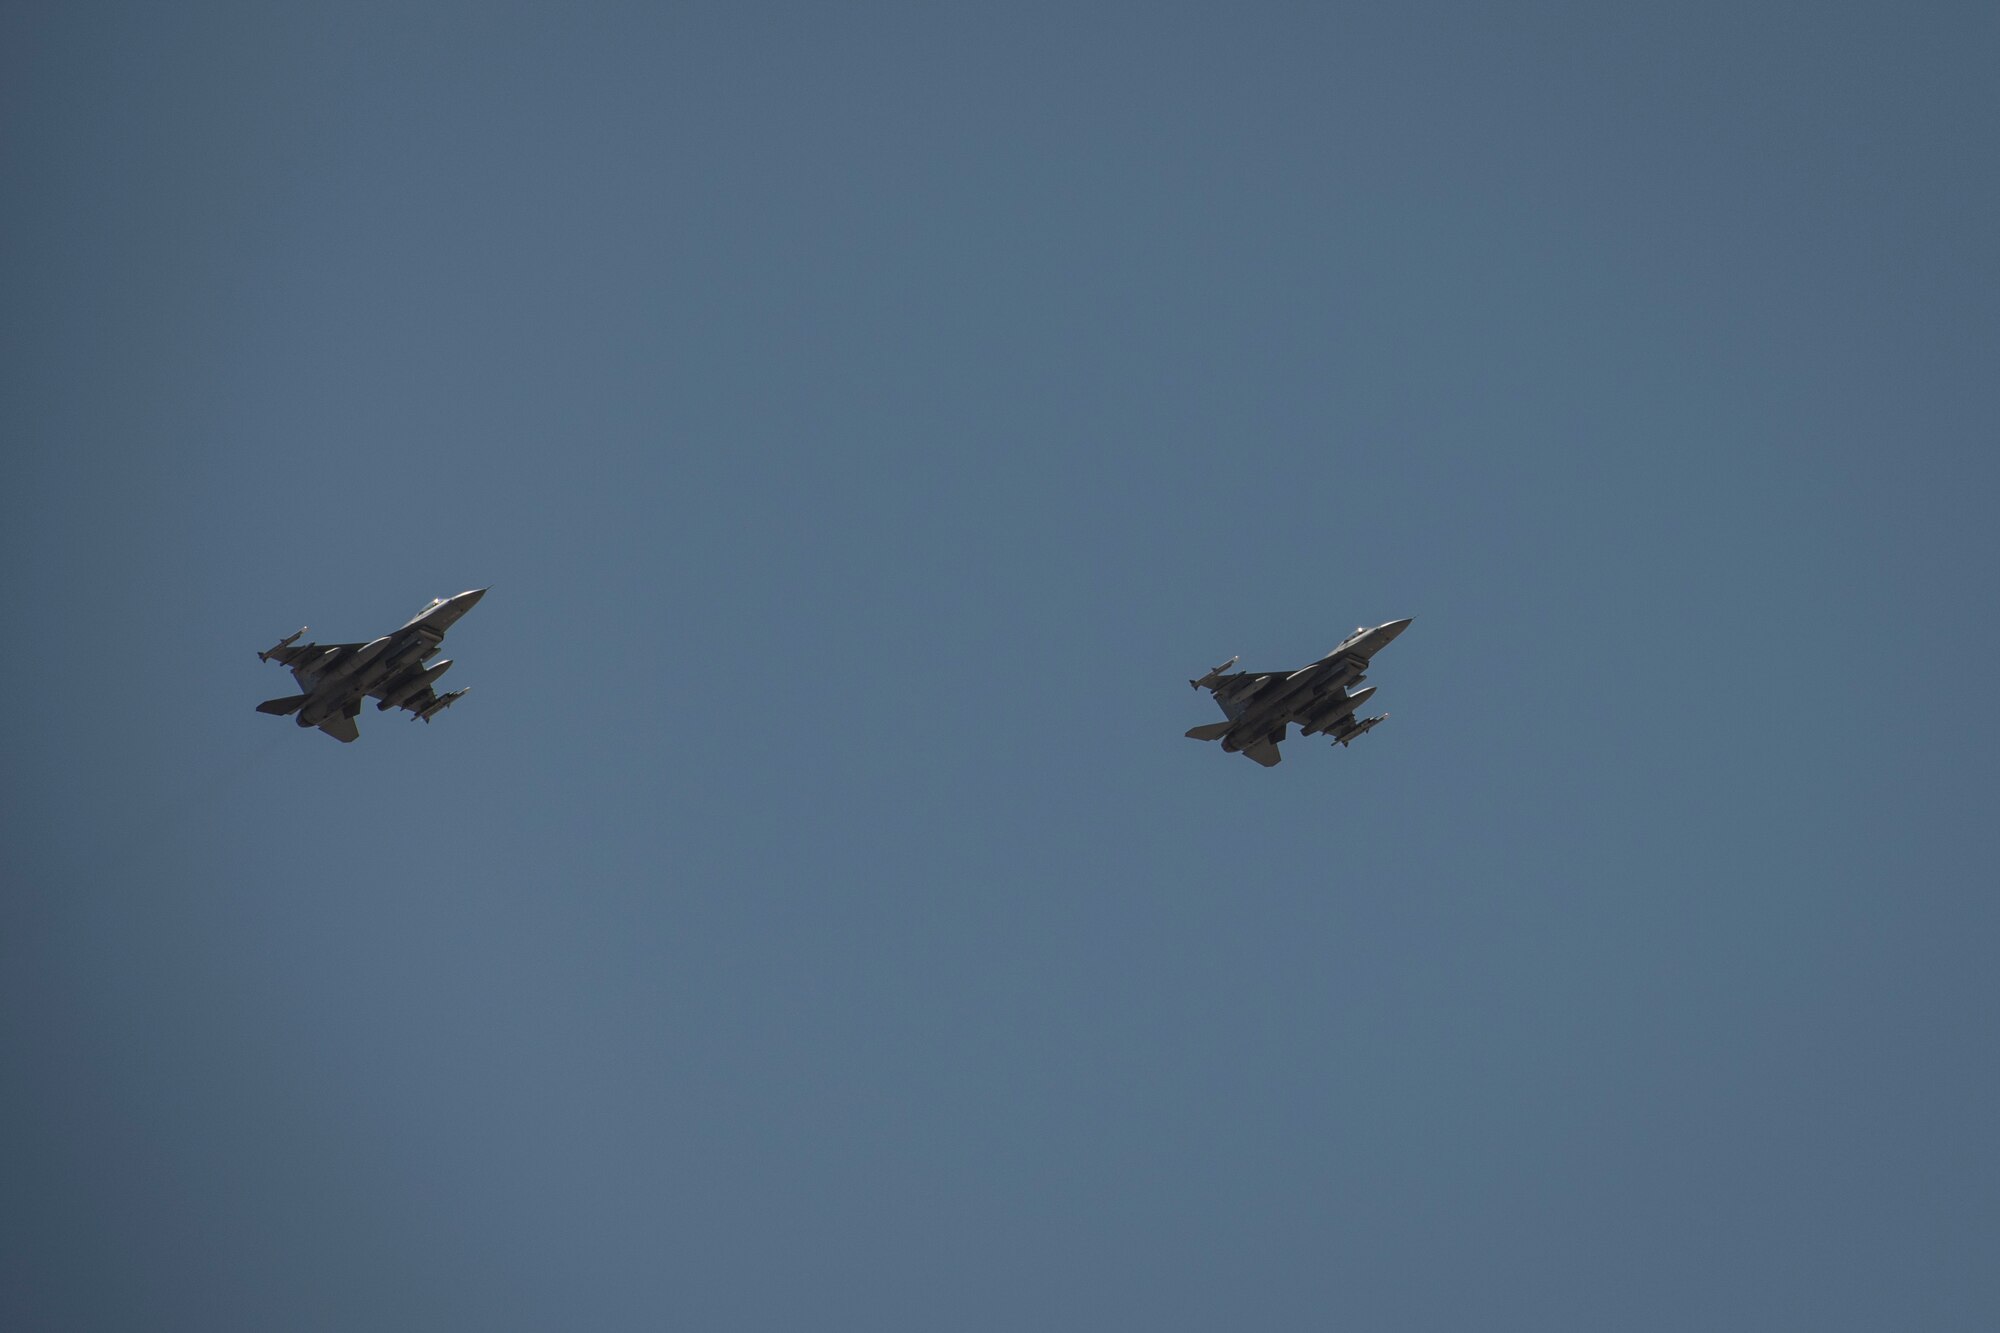 Two U.S. Air Force F-16 “Viper” Fighting Falcons assigned to the 79th Expeditionary Fighter Squadron fly above an undisclosed location in the U.S. Central Command area of responsibility, Feb. 14, 2020.